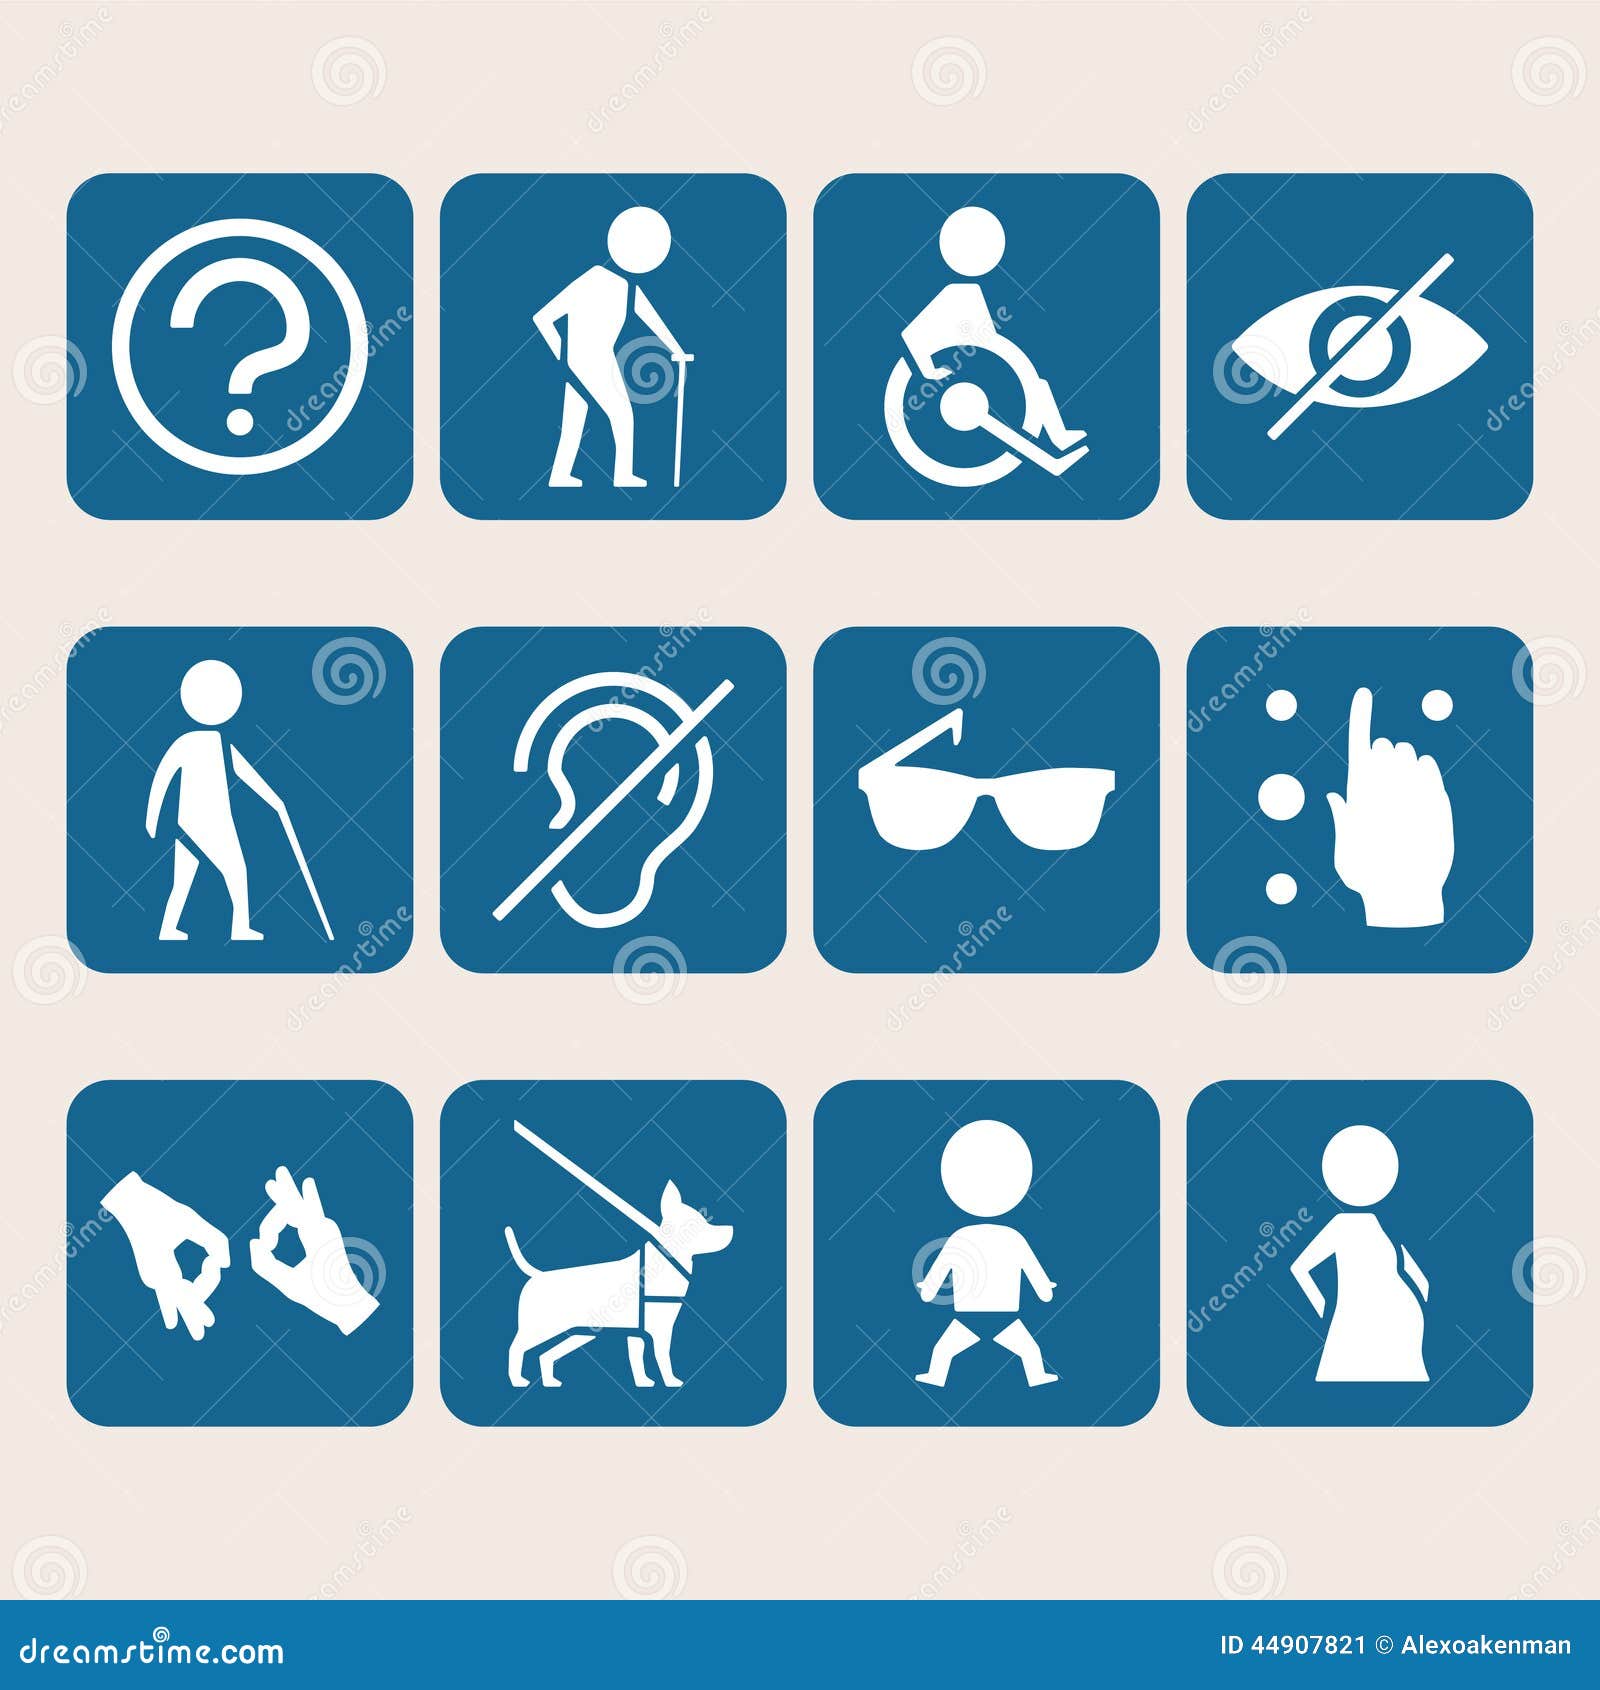  colorful icon set of access signs for physically disabled people